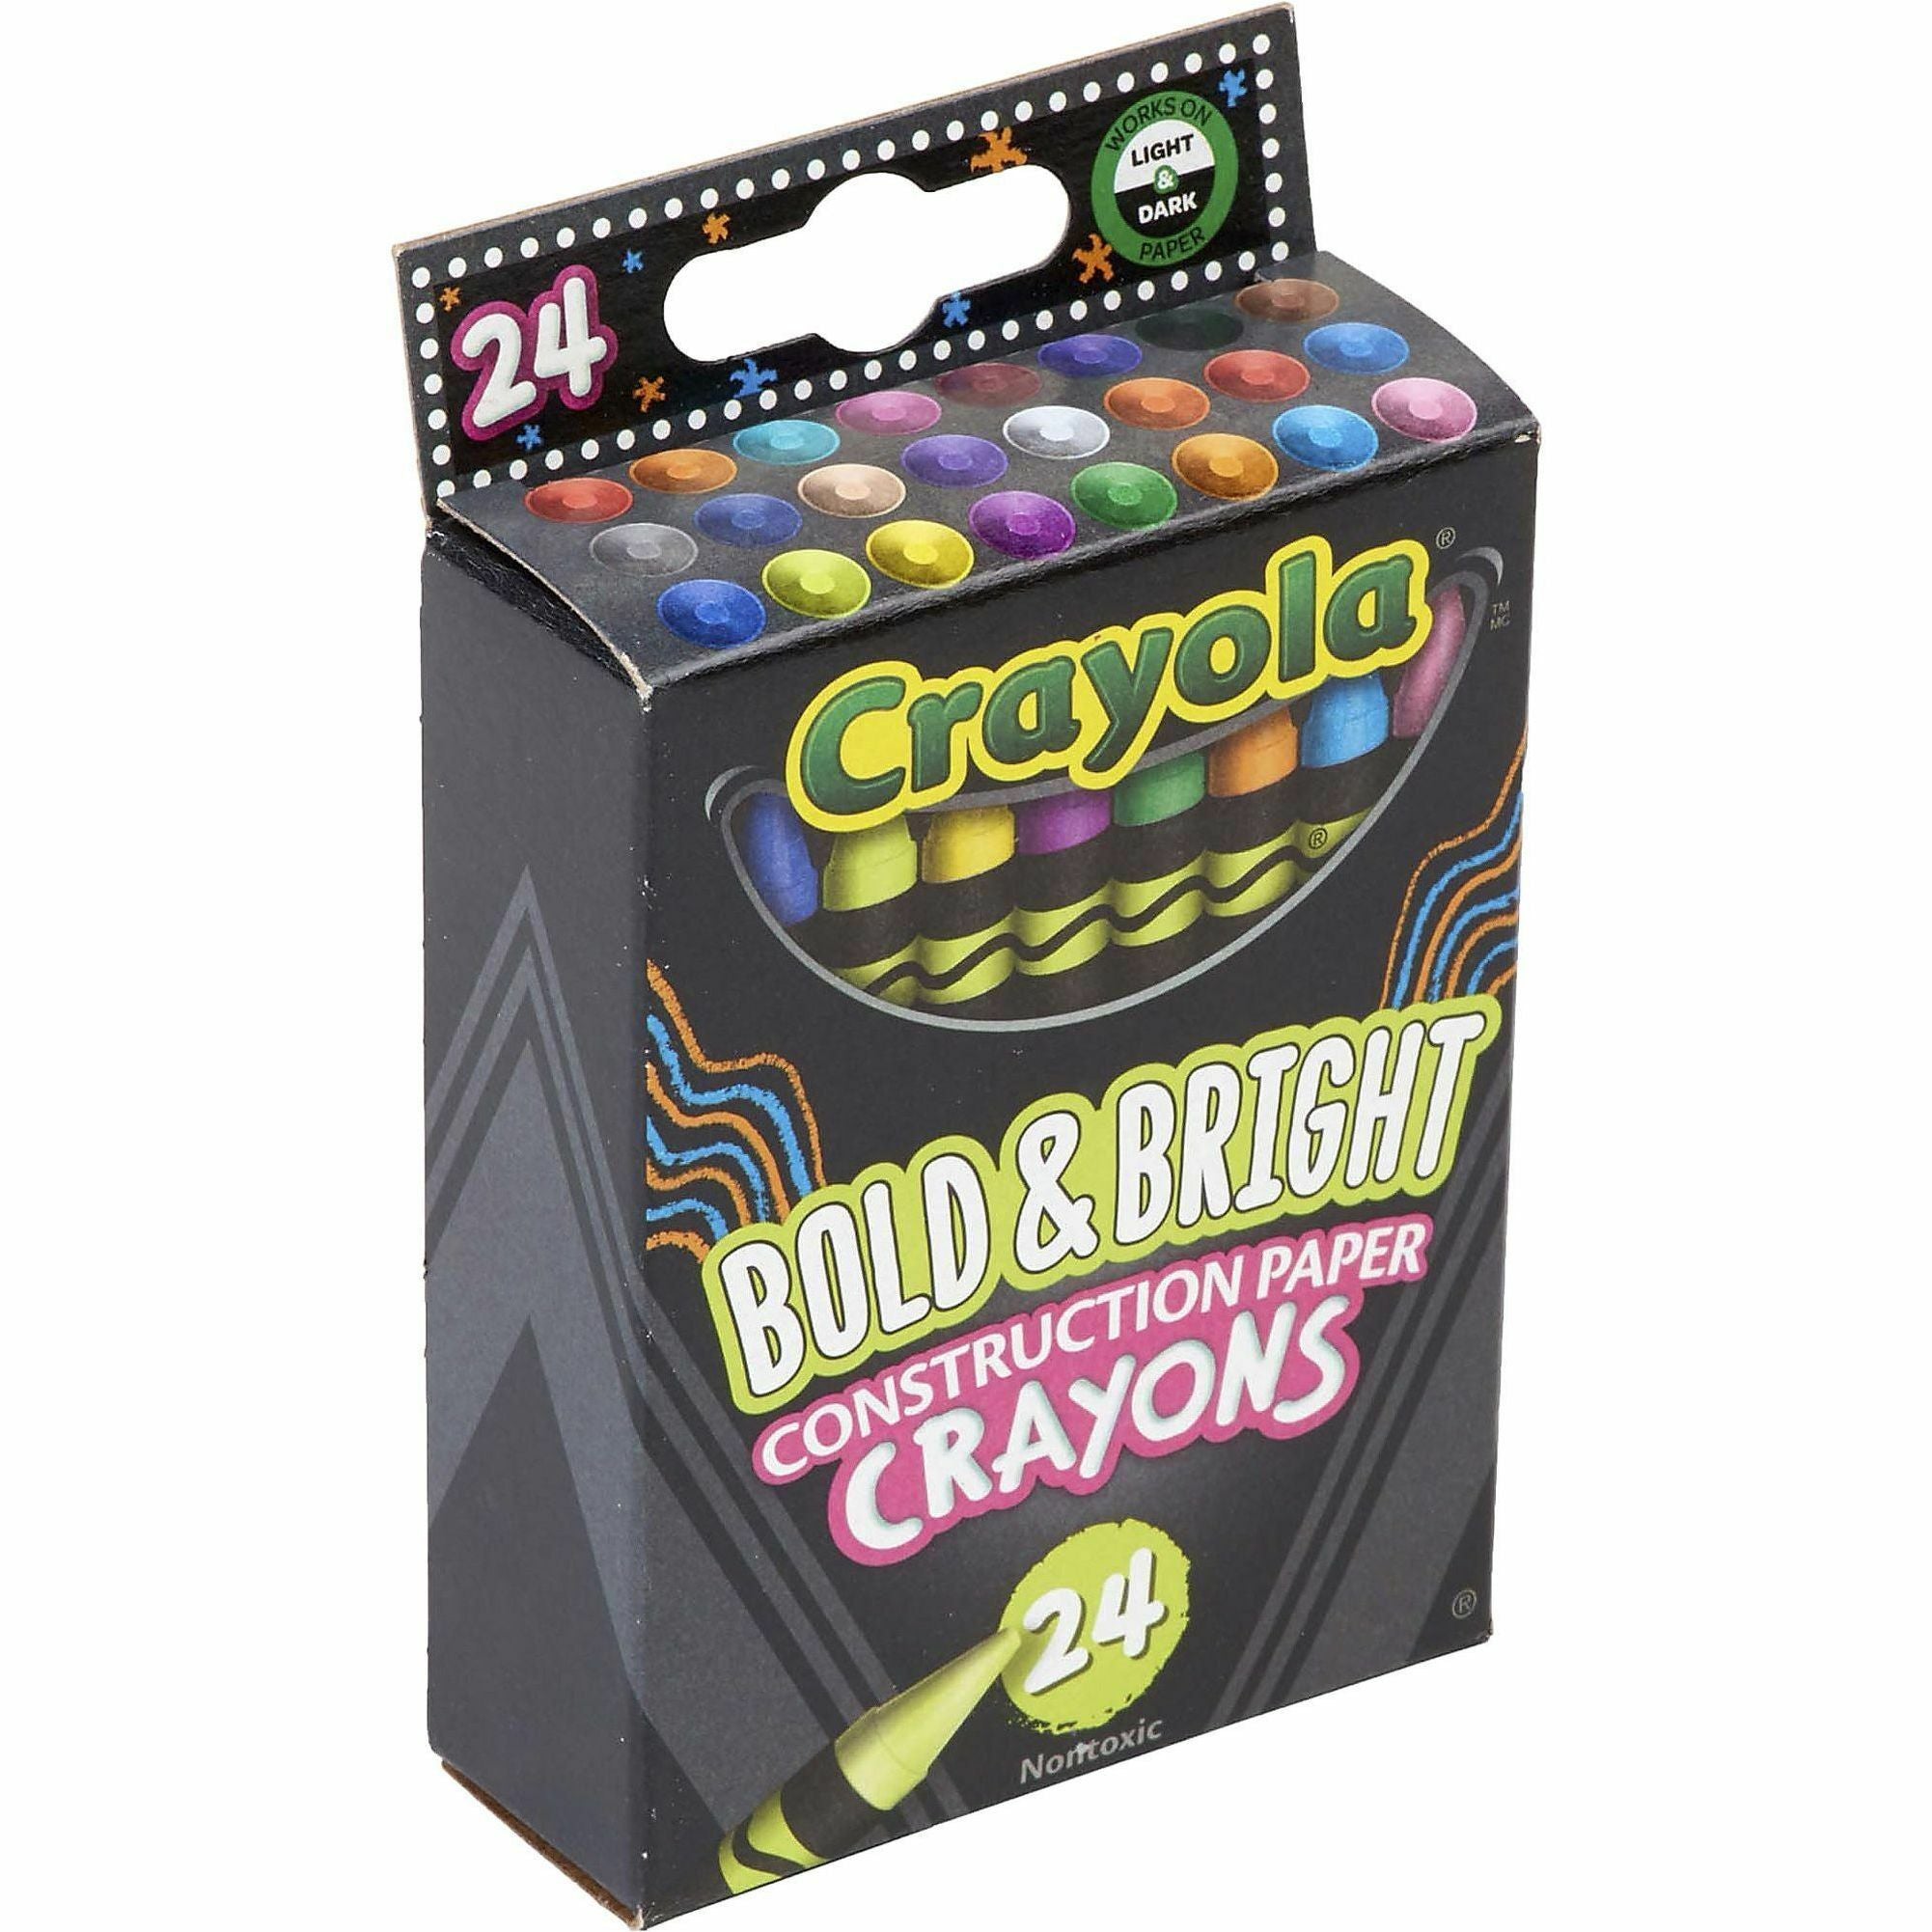 crayola-construction-paper-crayons-art-paper-cardboard-1-pack-assorted_cyo523463 - 3